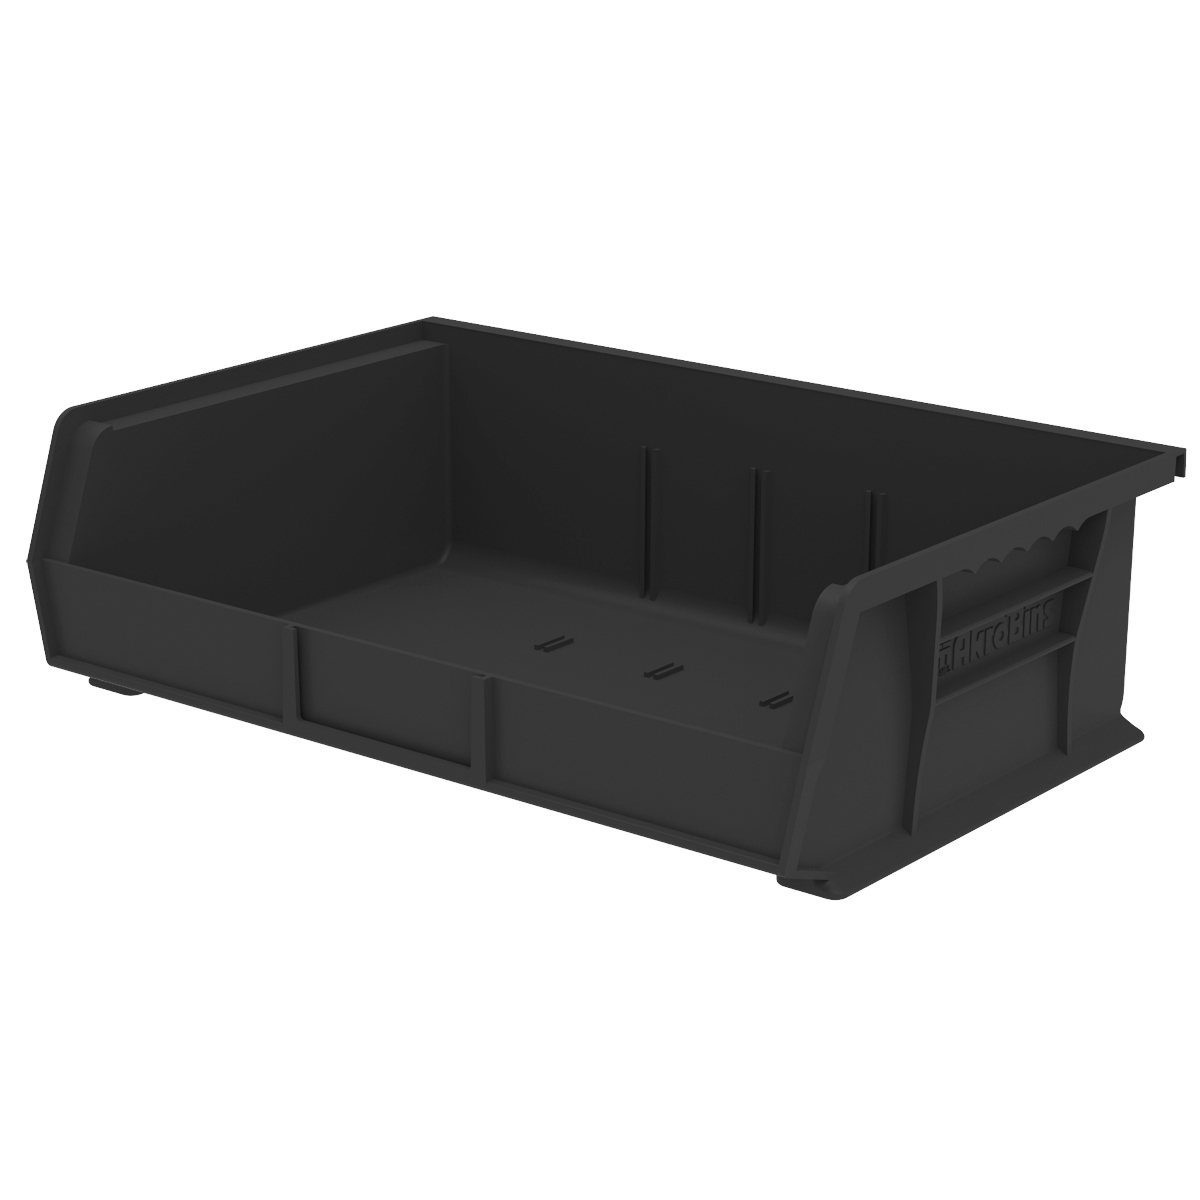 Akro-Mils 6 Pack of 10-7/8 x 16-1/2 x 5" Black AkroBins Plastic Storage Bin Hanging Stacking Containers # 30255BLACK - image 1 of 8